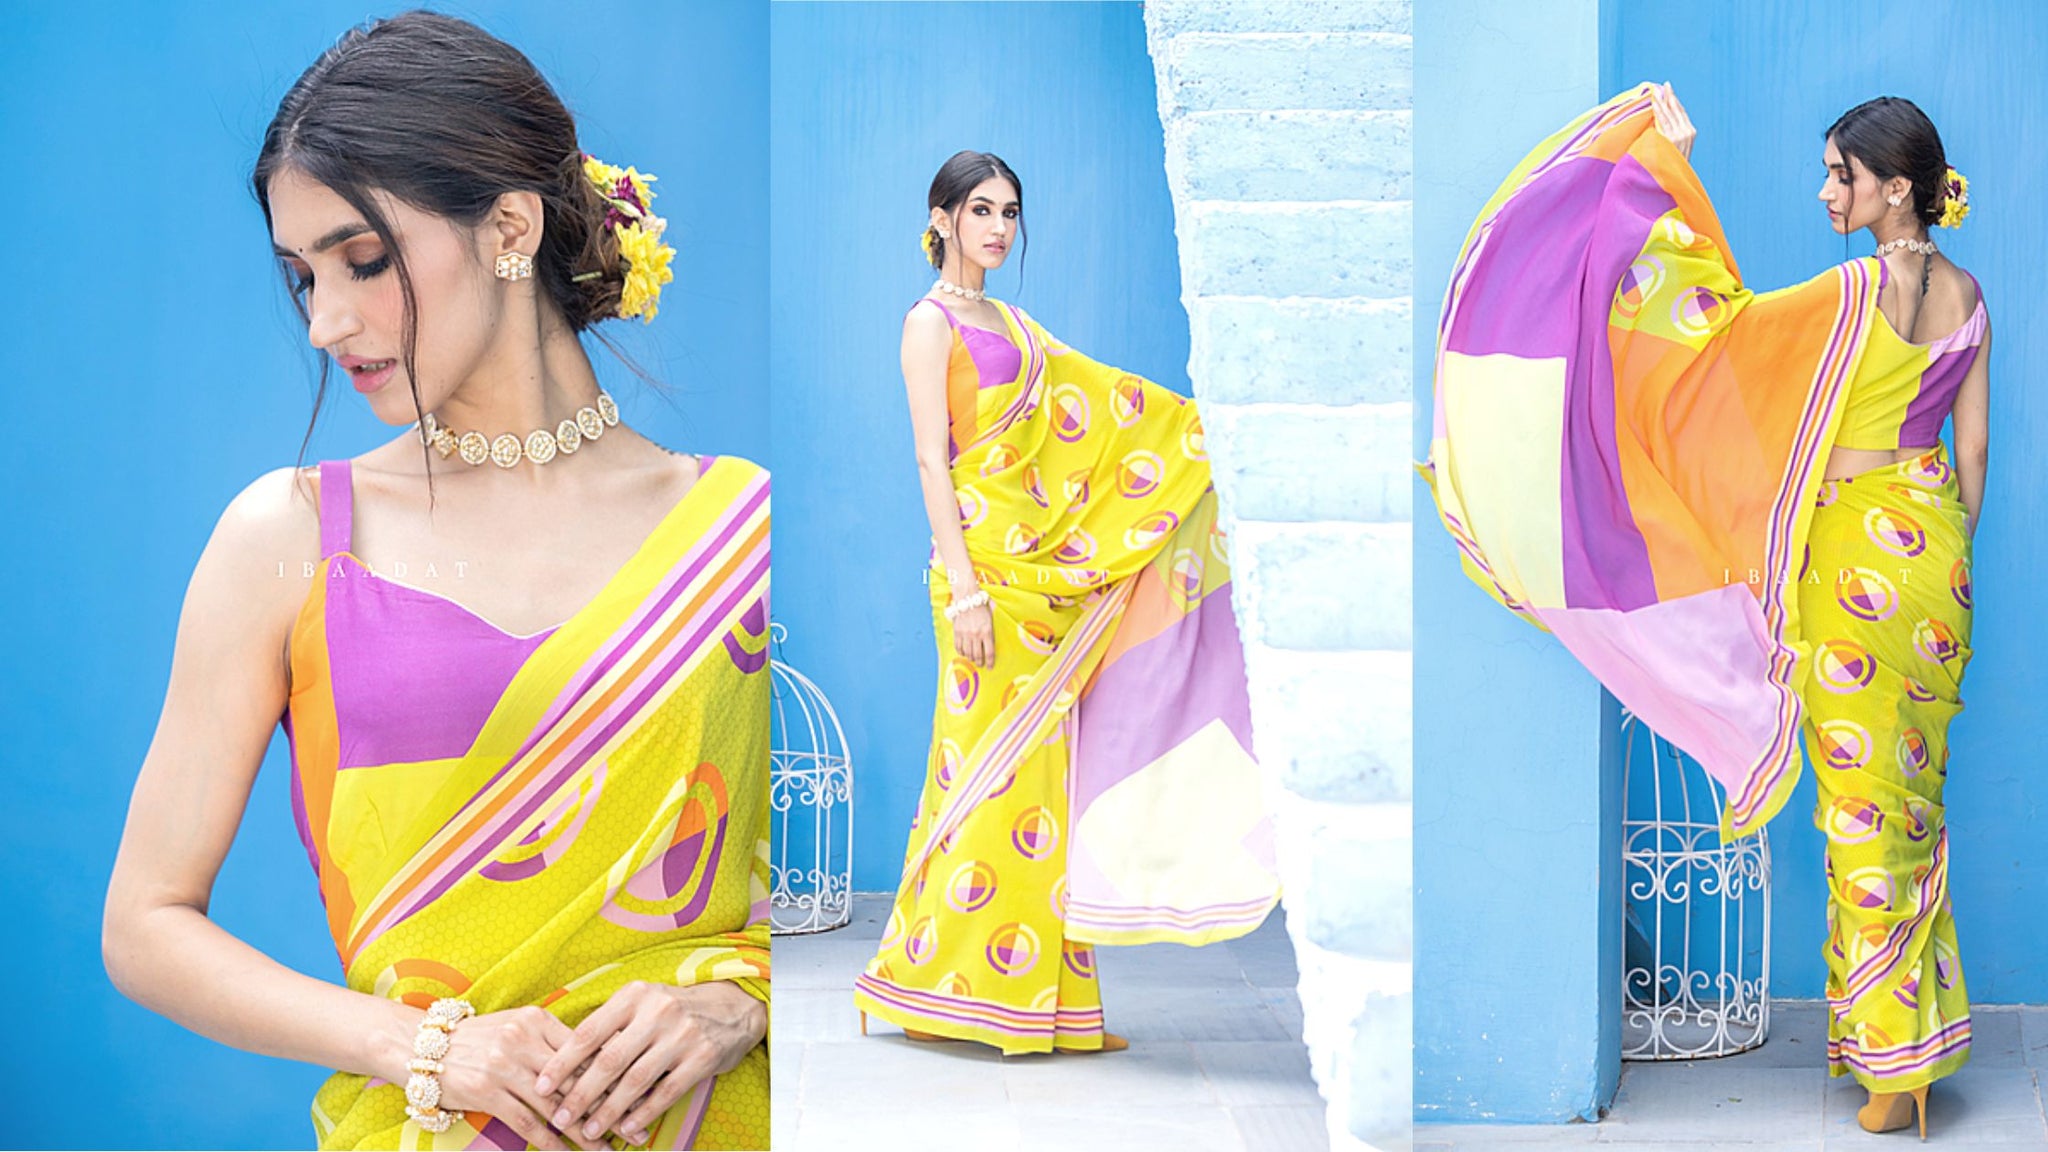 How To Look Stylish And Professional In Formal Work Wear Sarees! | Formal  saree, Saree jacket designs, Cotton saree blouse designs